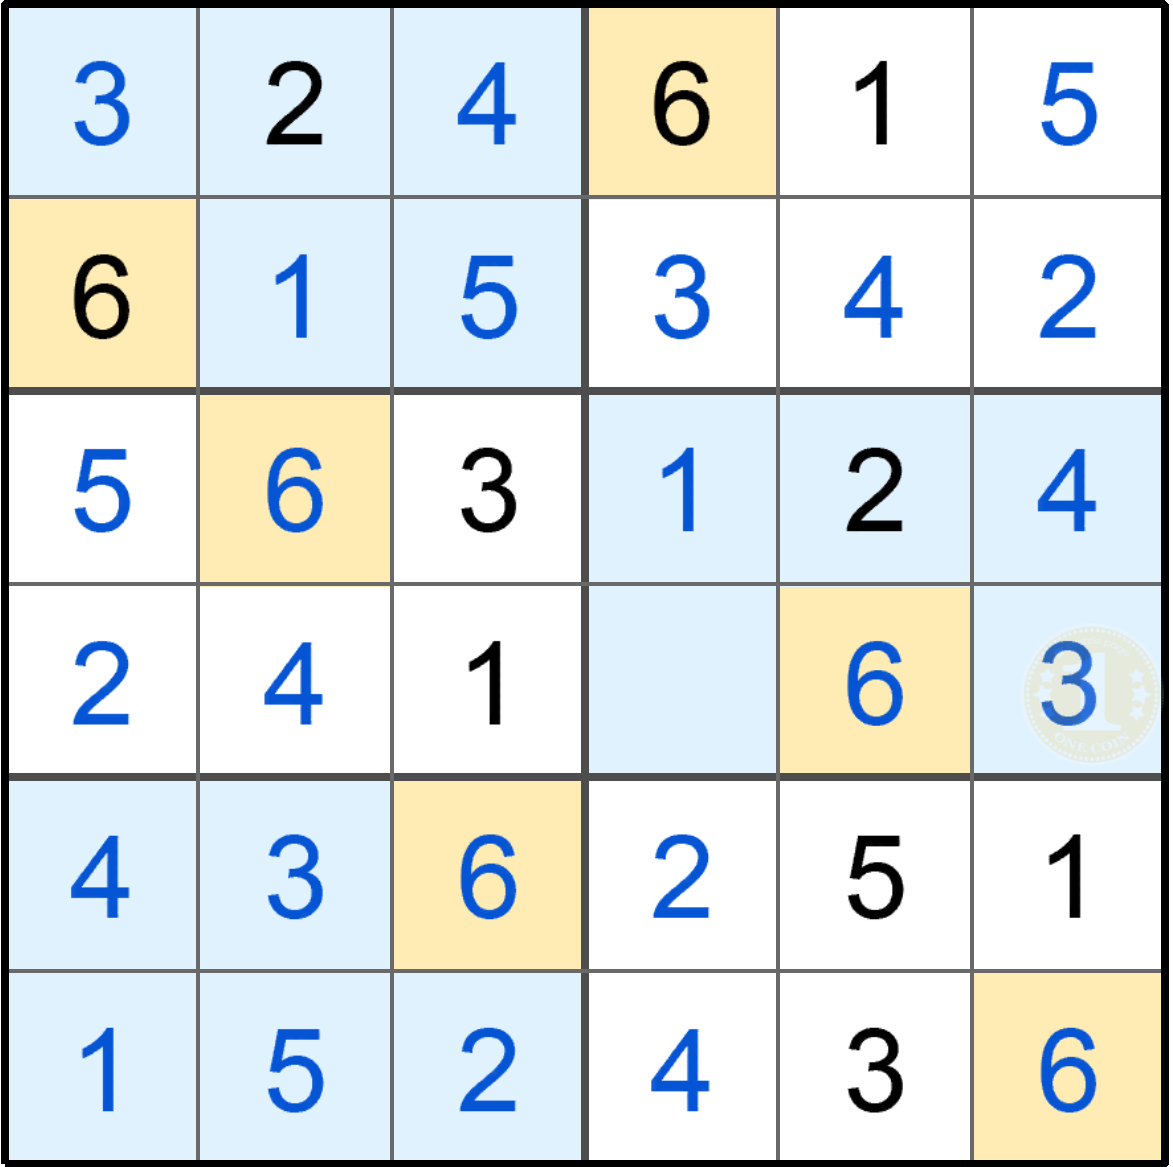 Puzzle Page Sudoku March 5 2021 Answers PuzzlePageAnswers net